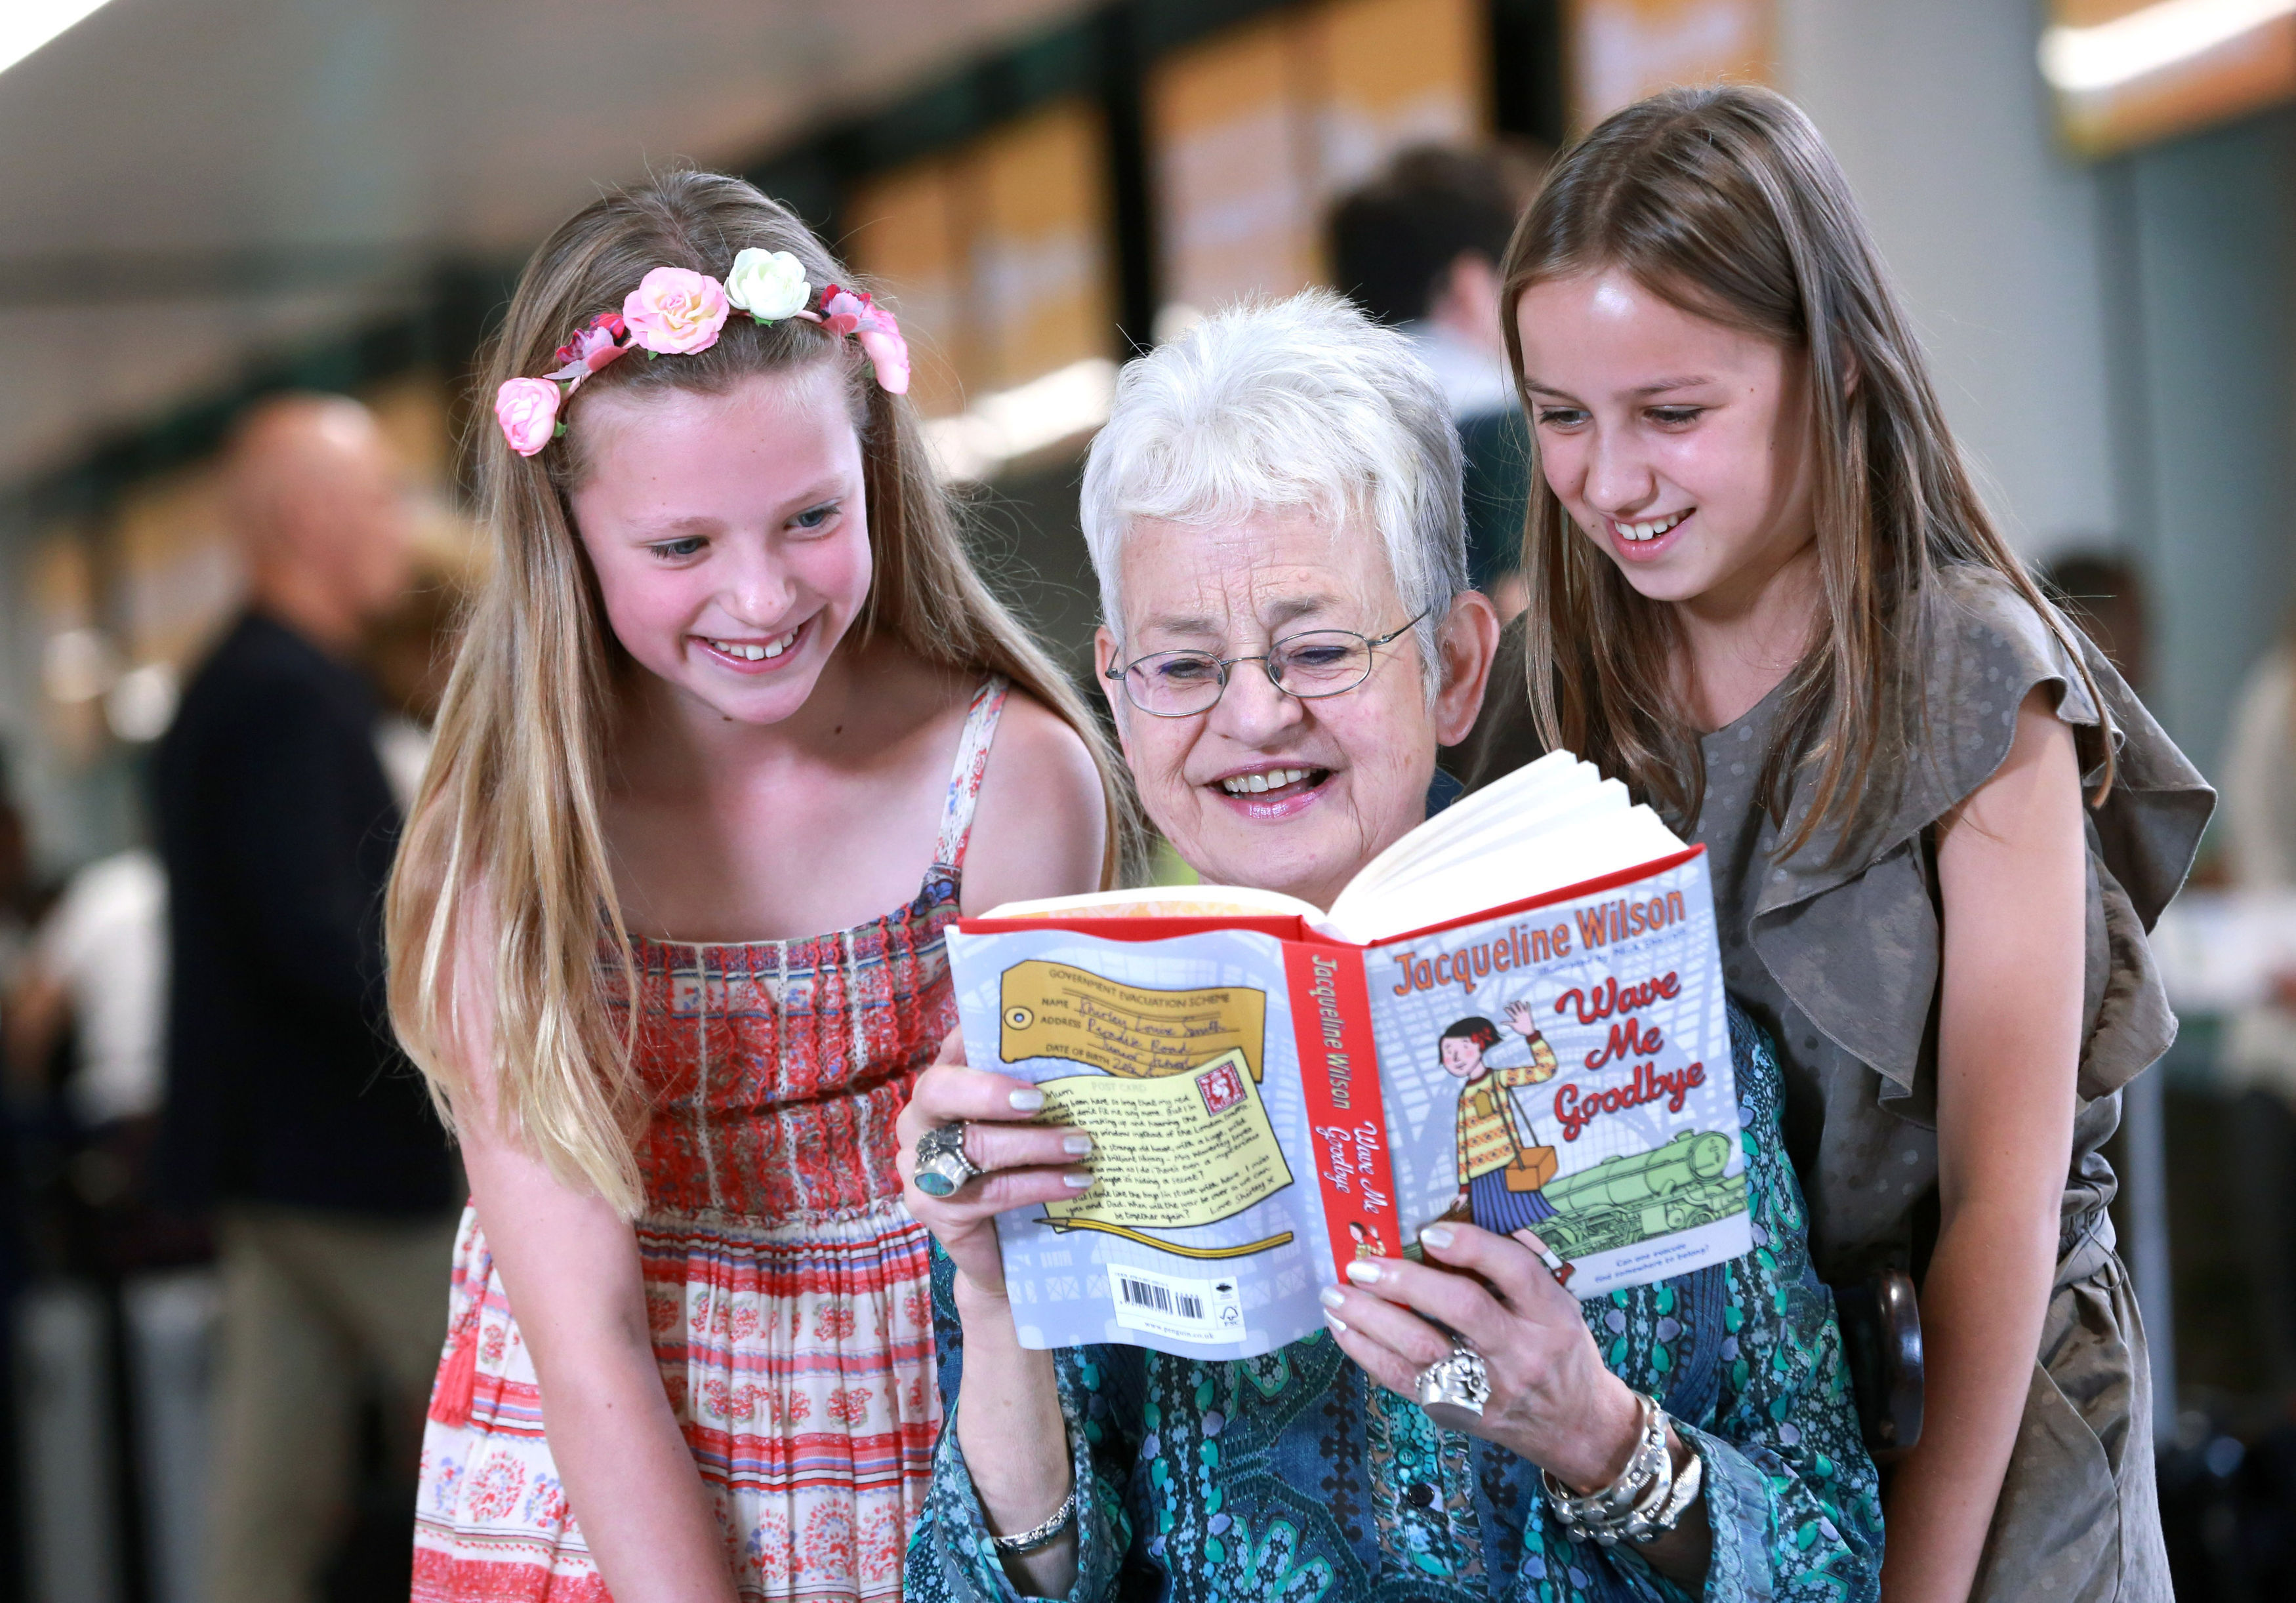 Dame Jacqueline Wilson is joined by Sophie Raison, nine, and Elise Whitley, 10, as she helps to launch the easyJet Book Club (Matt Alexander/PA)